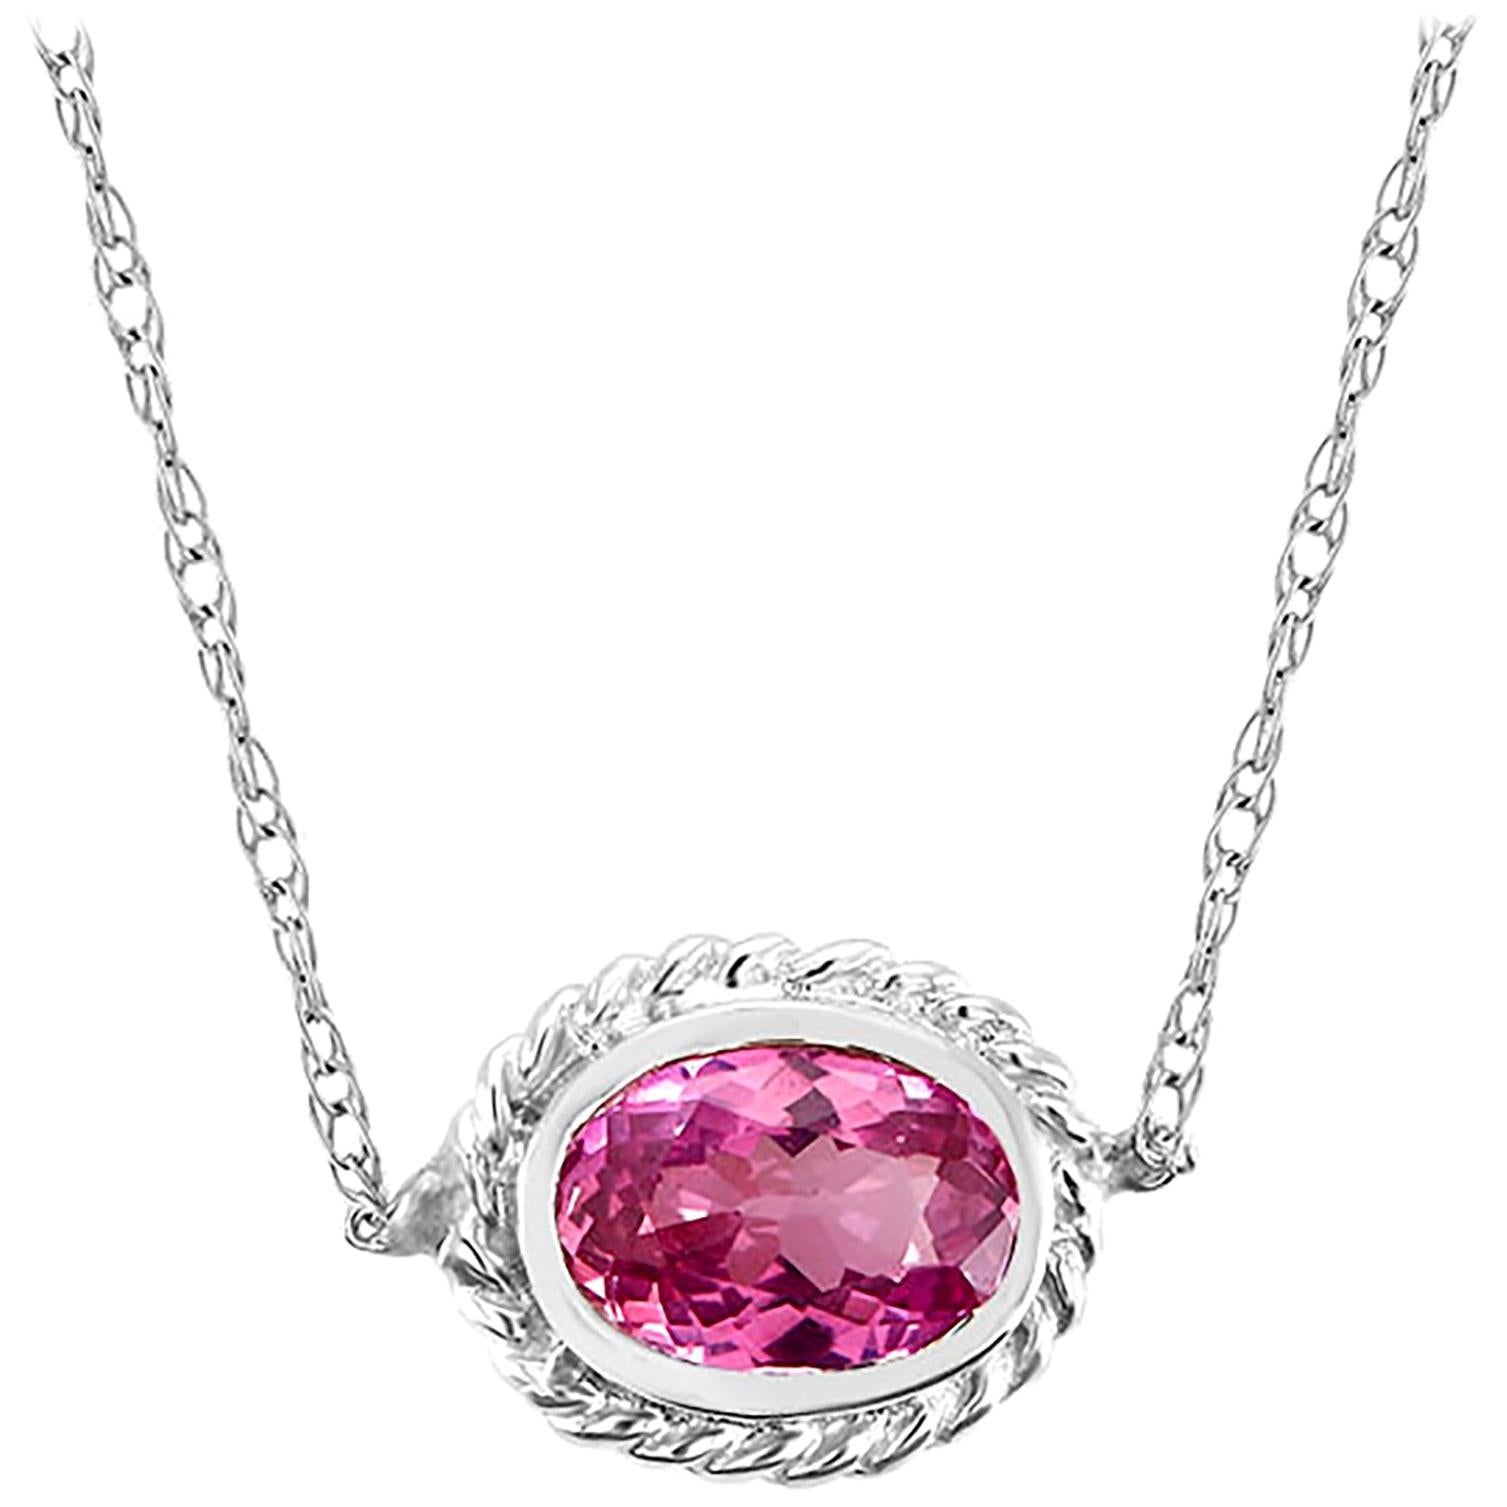 White Gold Pink Sapphire and Diamond Pendant Necklace Weighing 0.73 Carat